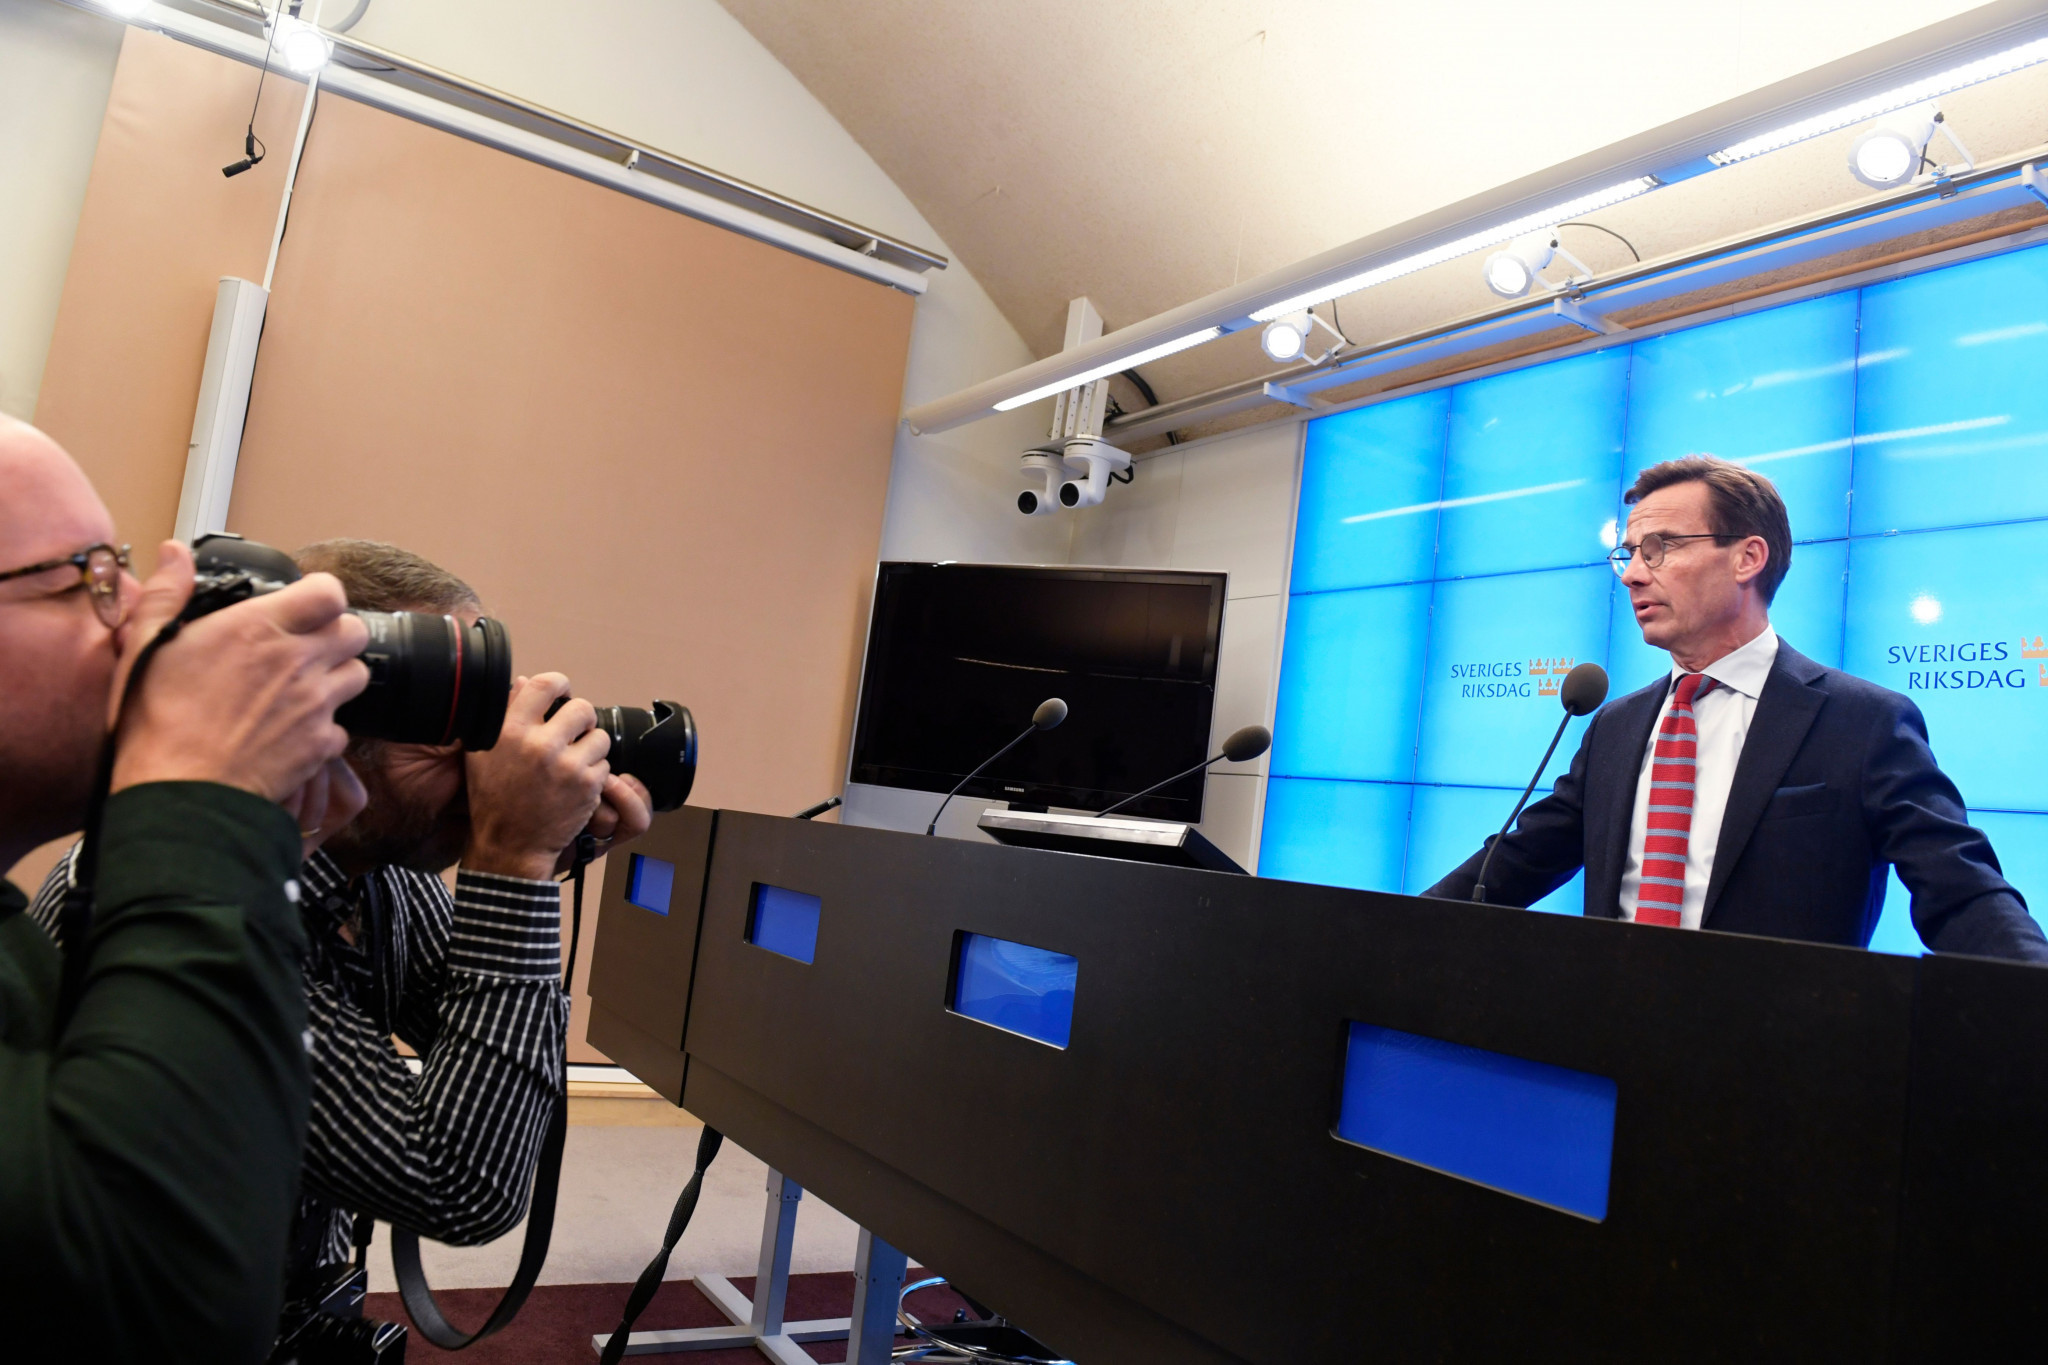 Stockholm 2026 will be hoping the potential appointment of Ulf Kristersson as Sweden's new Prime Minister will break the political deadlock in the country and help them gain Government support for their bid ©Getty Images